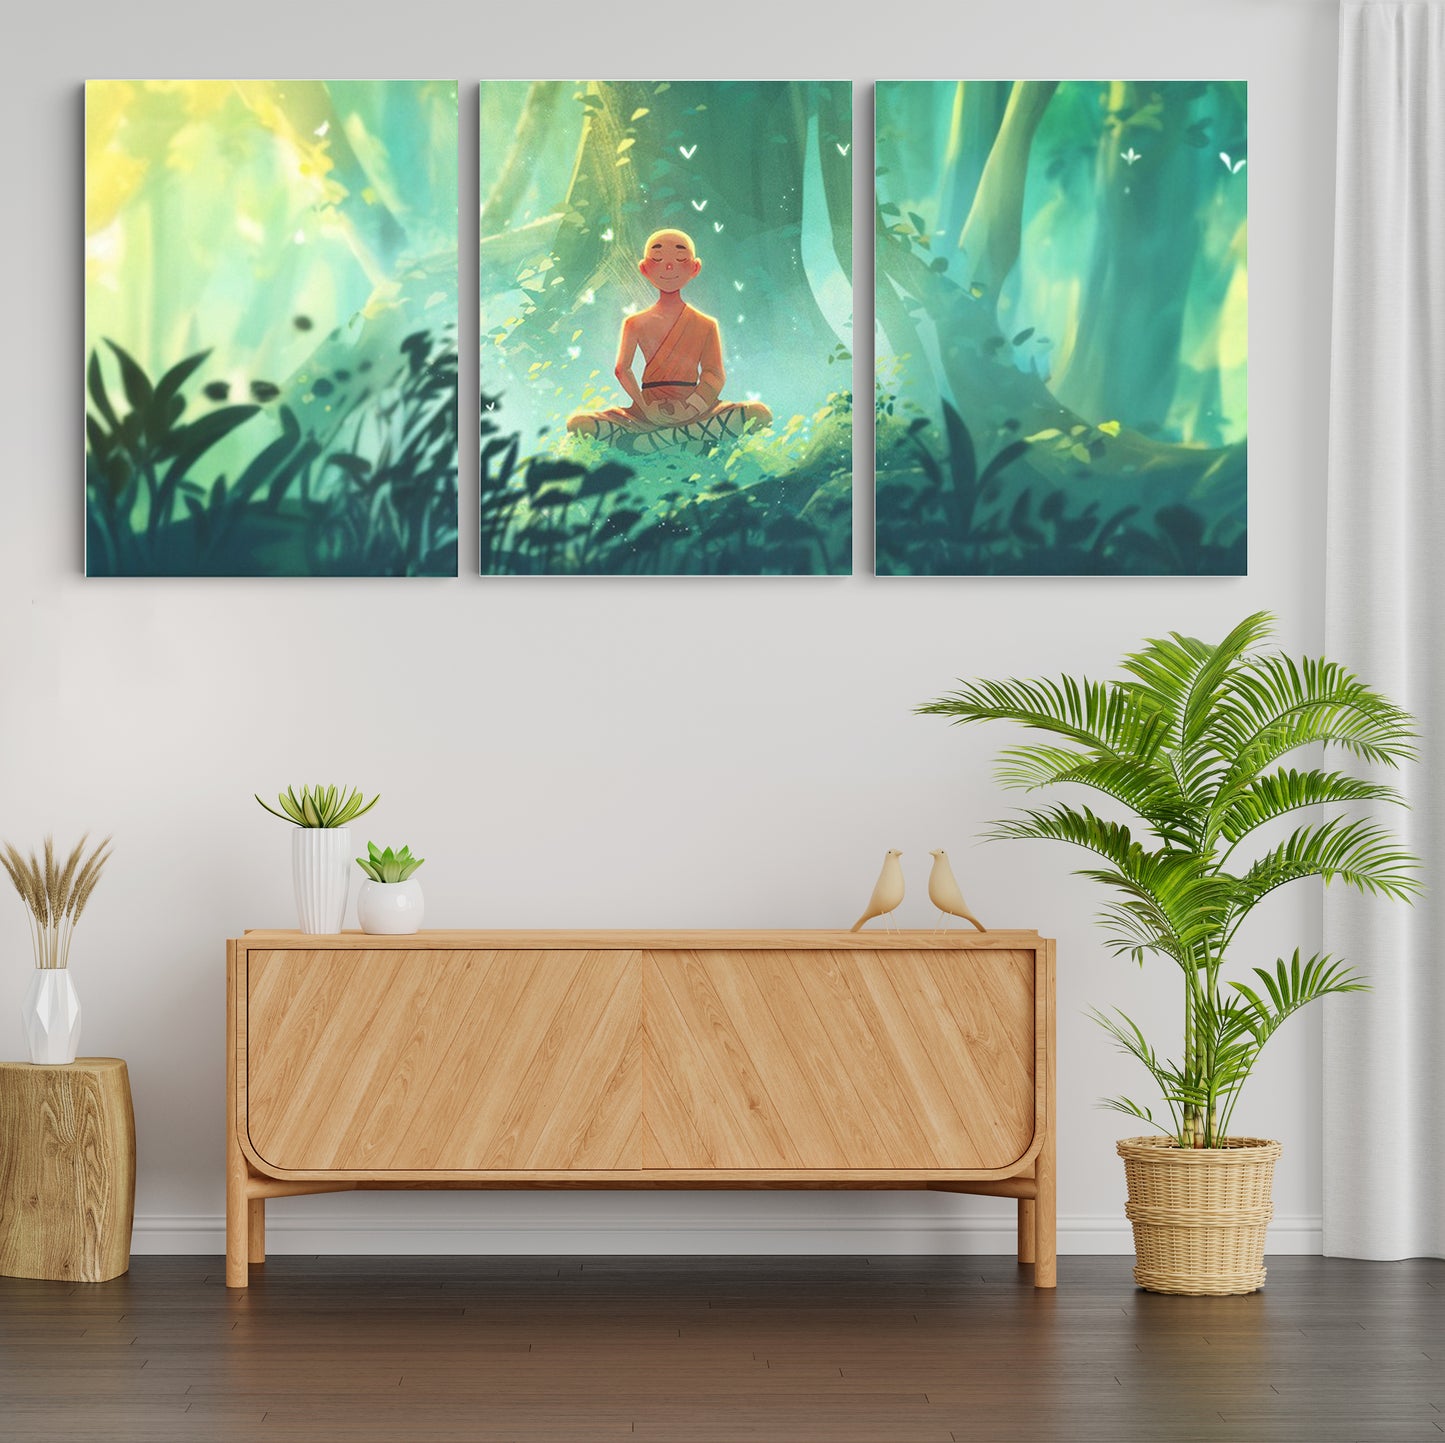 Serenity Within: Monk Meditating - Inspiring Wall Art Celebrating the Calm and Spiritual Serenity of a Meditating Monk - S06E15